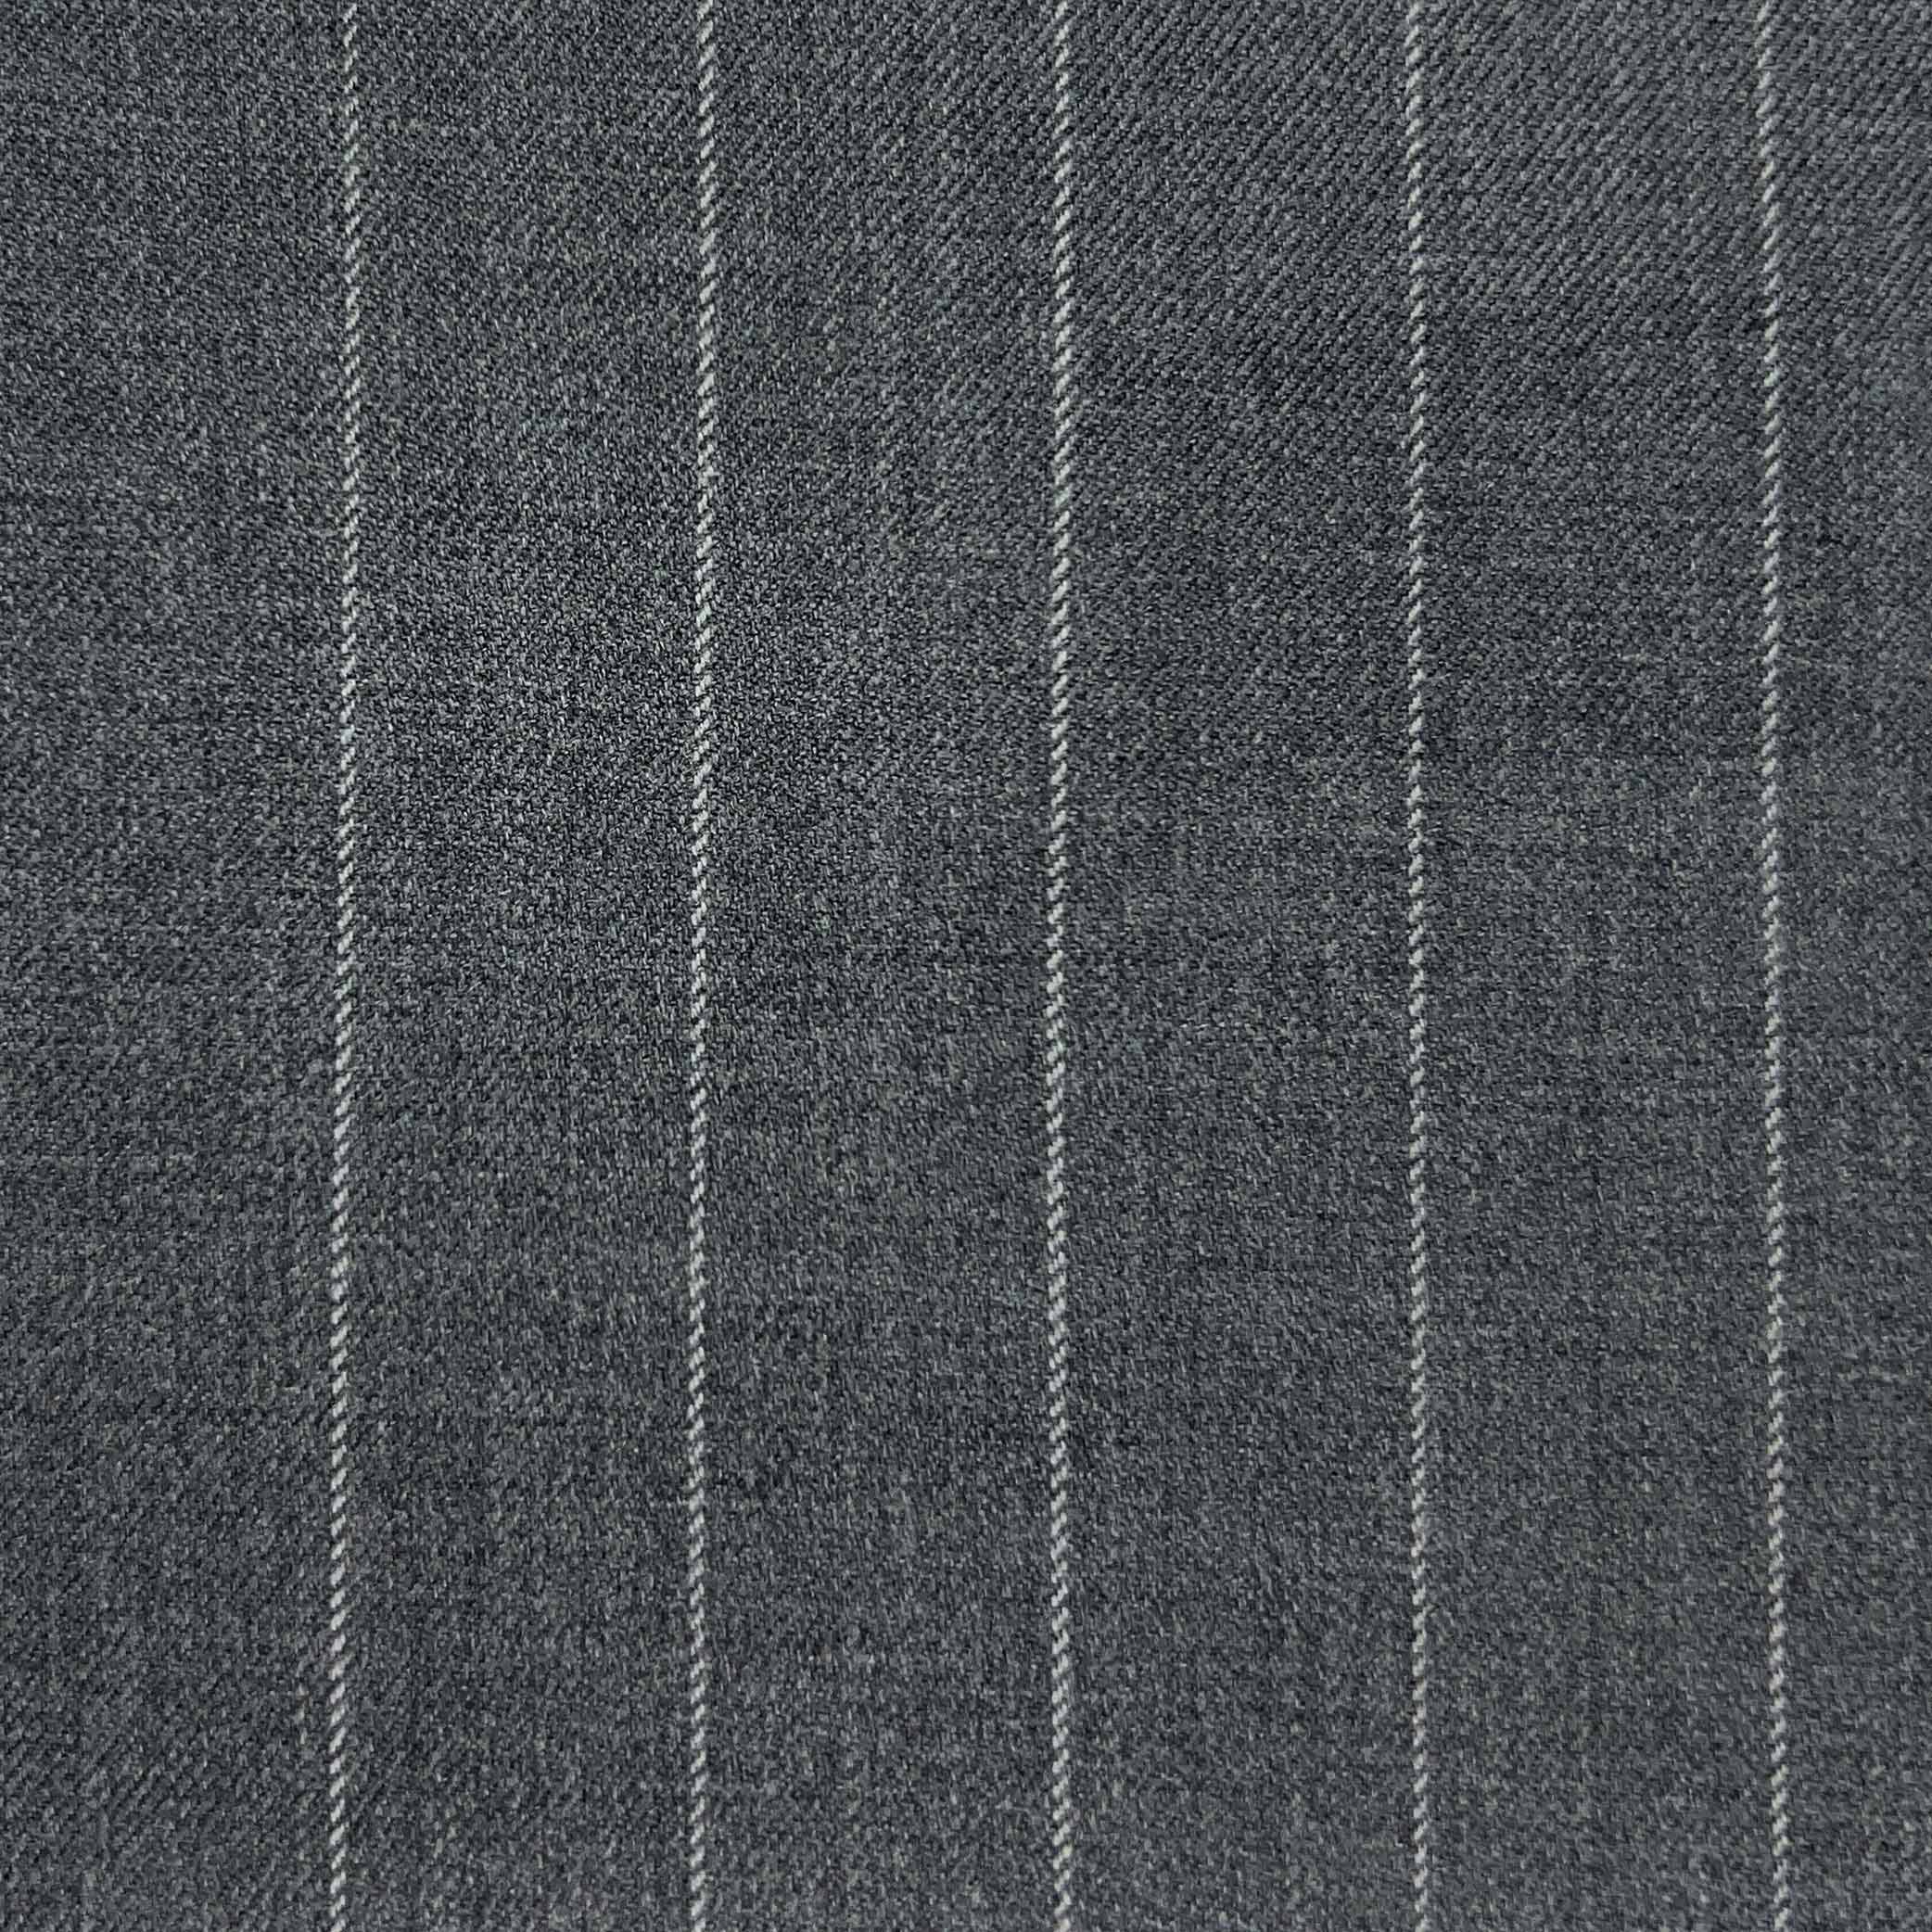 Westwood Hart Online Custom Hand Tailor Suits Sportcoats Trousers Waistcoats Overcoats Heather Grey With 3/4" Wide Chalkstripes Design